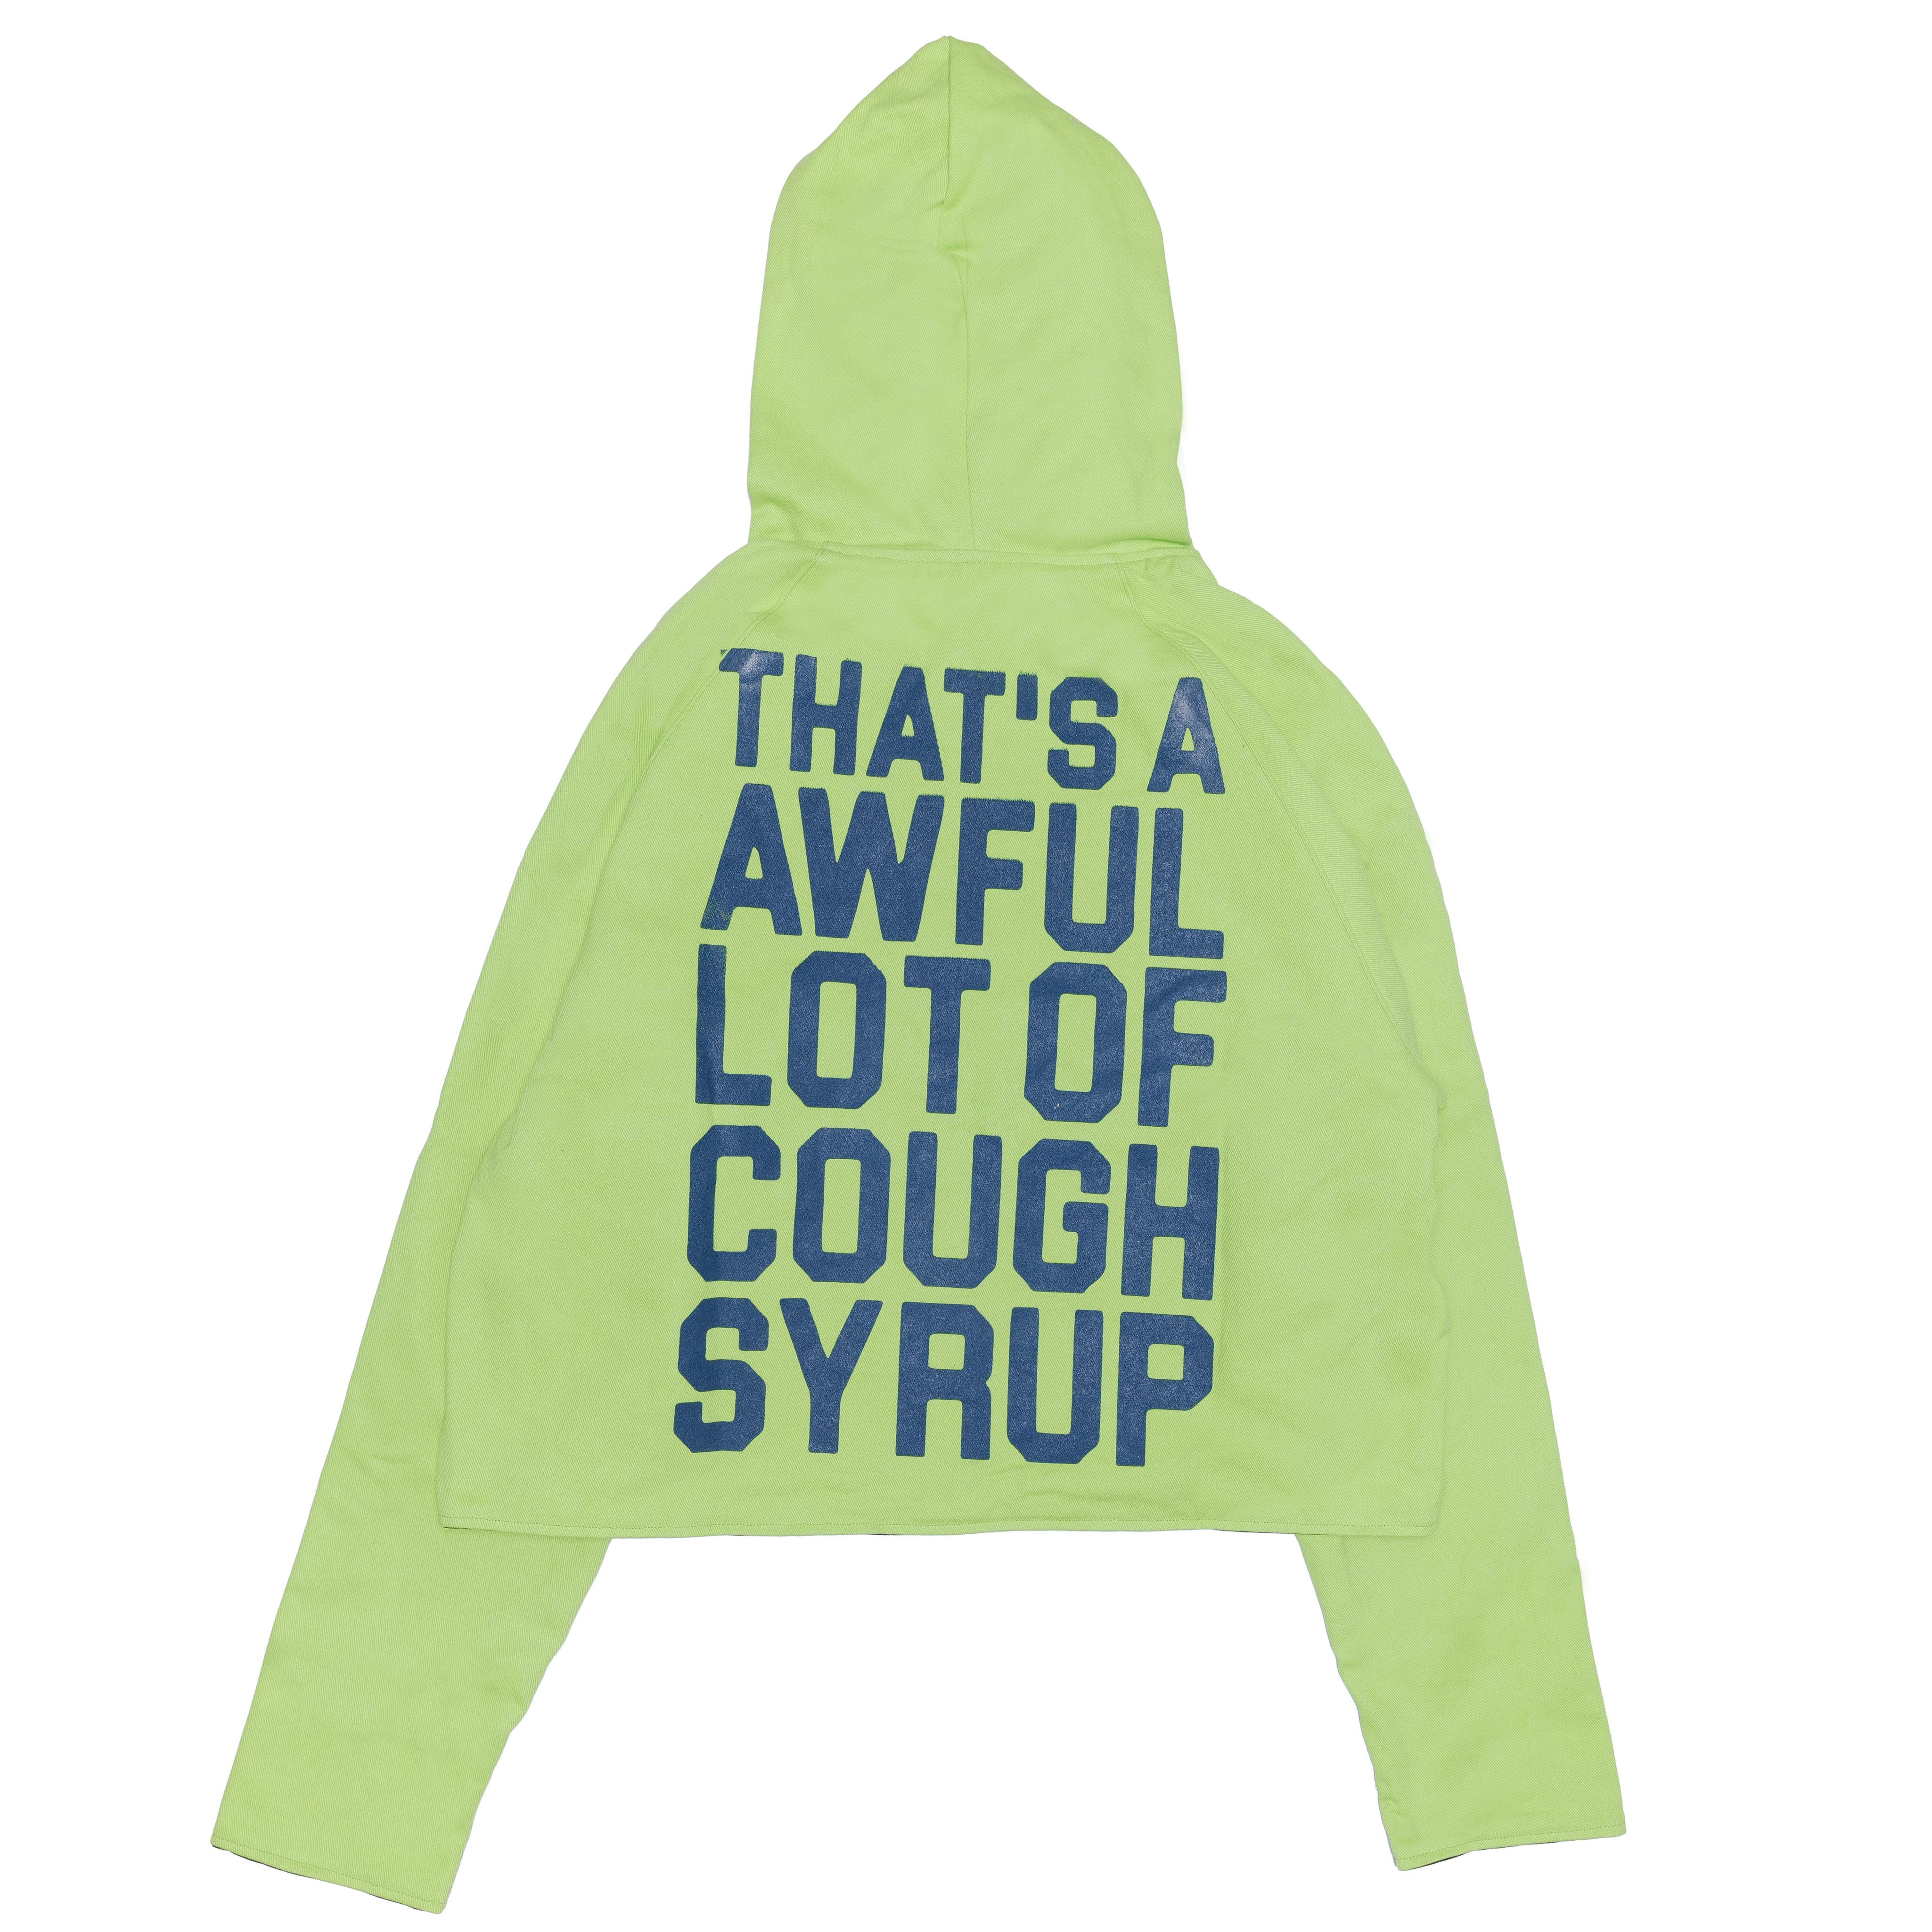 Reversible Cough Syrup Jacket